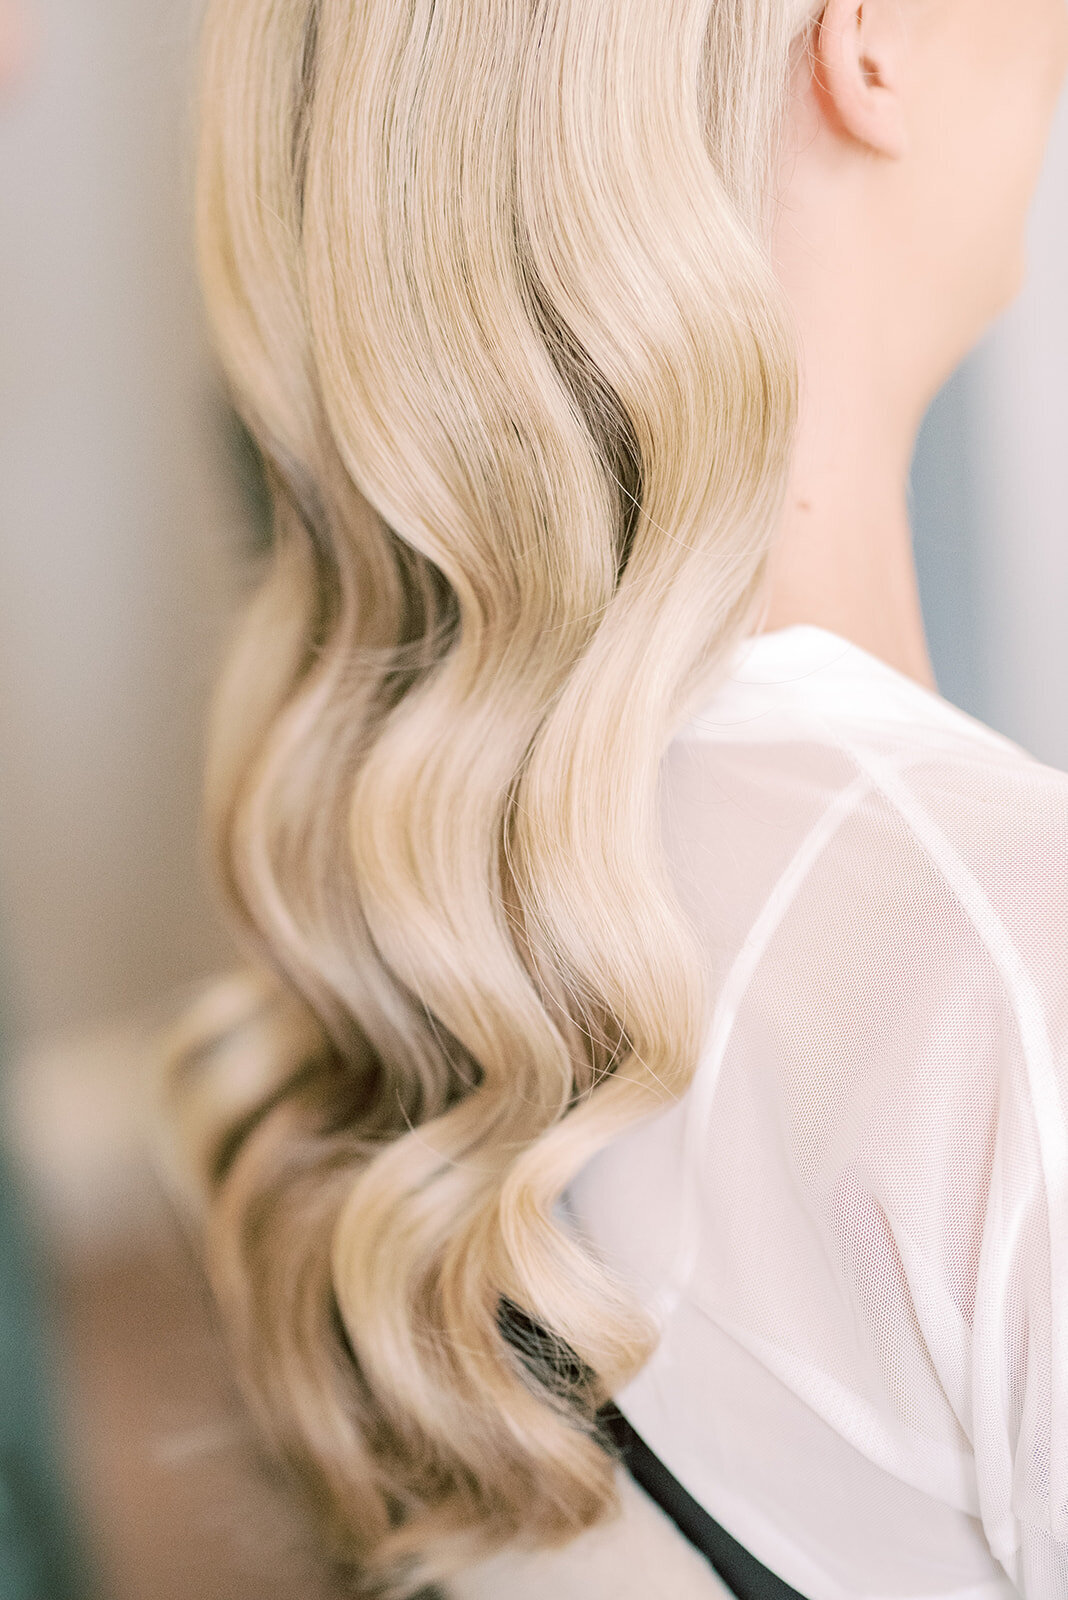 Detail shot of brides hollywood waves in her hair, the image is edited in a light and airy style